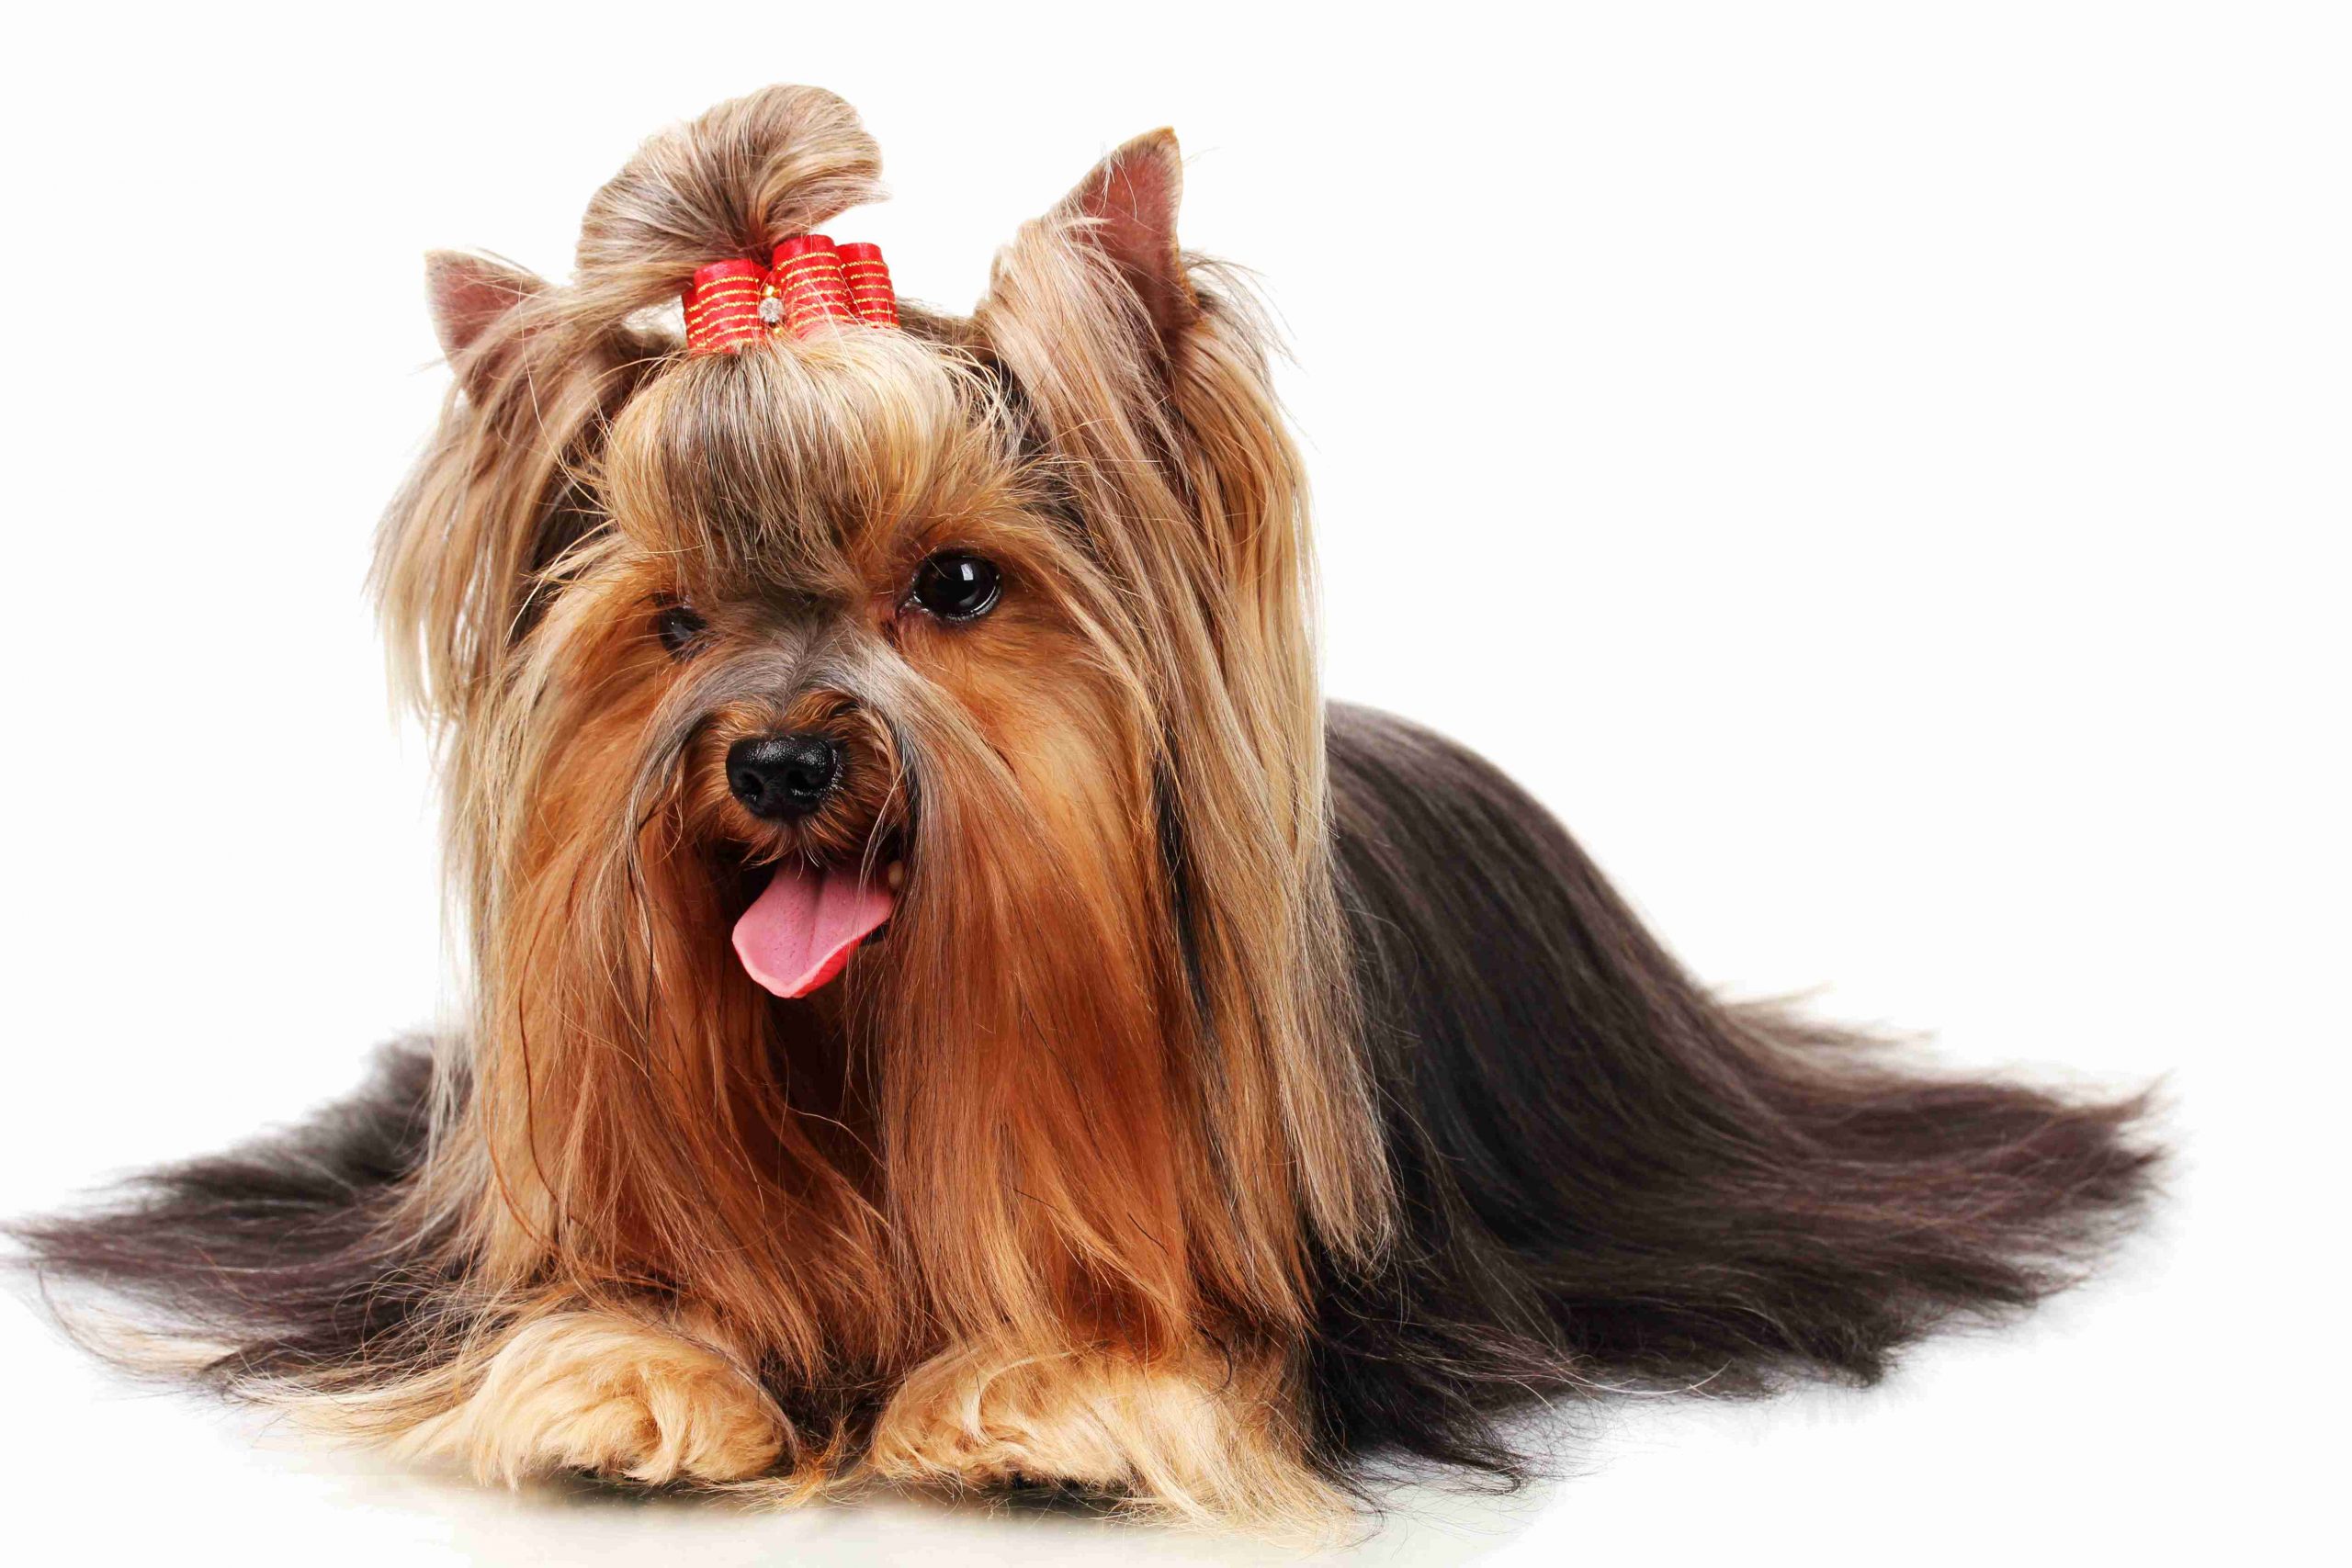 Long haired yorkie with a red bow